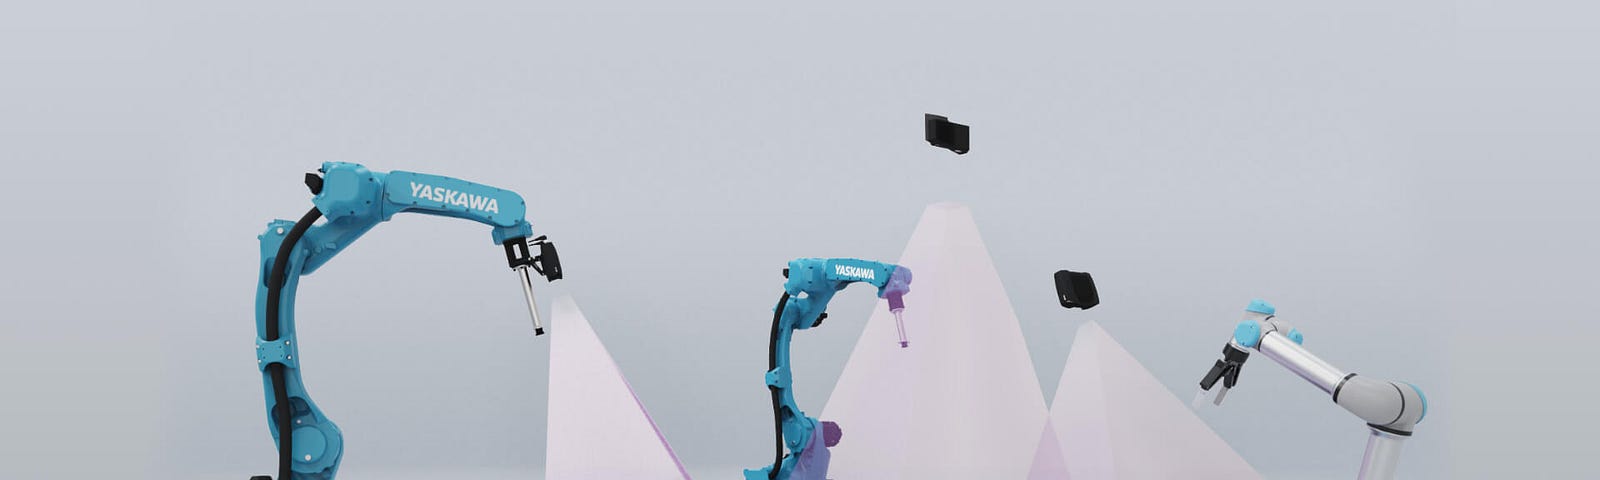 3D cameras can be mounted on the robot arm, or stationary above the target scene.